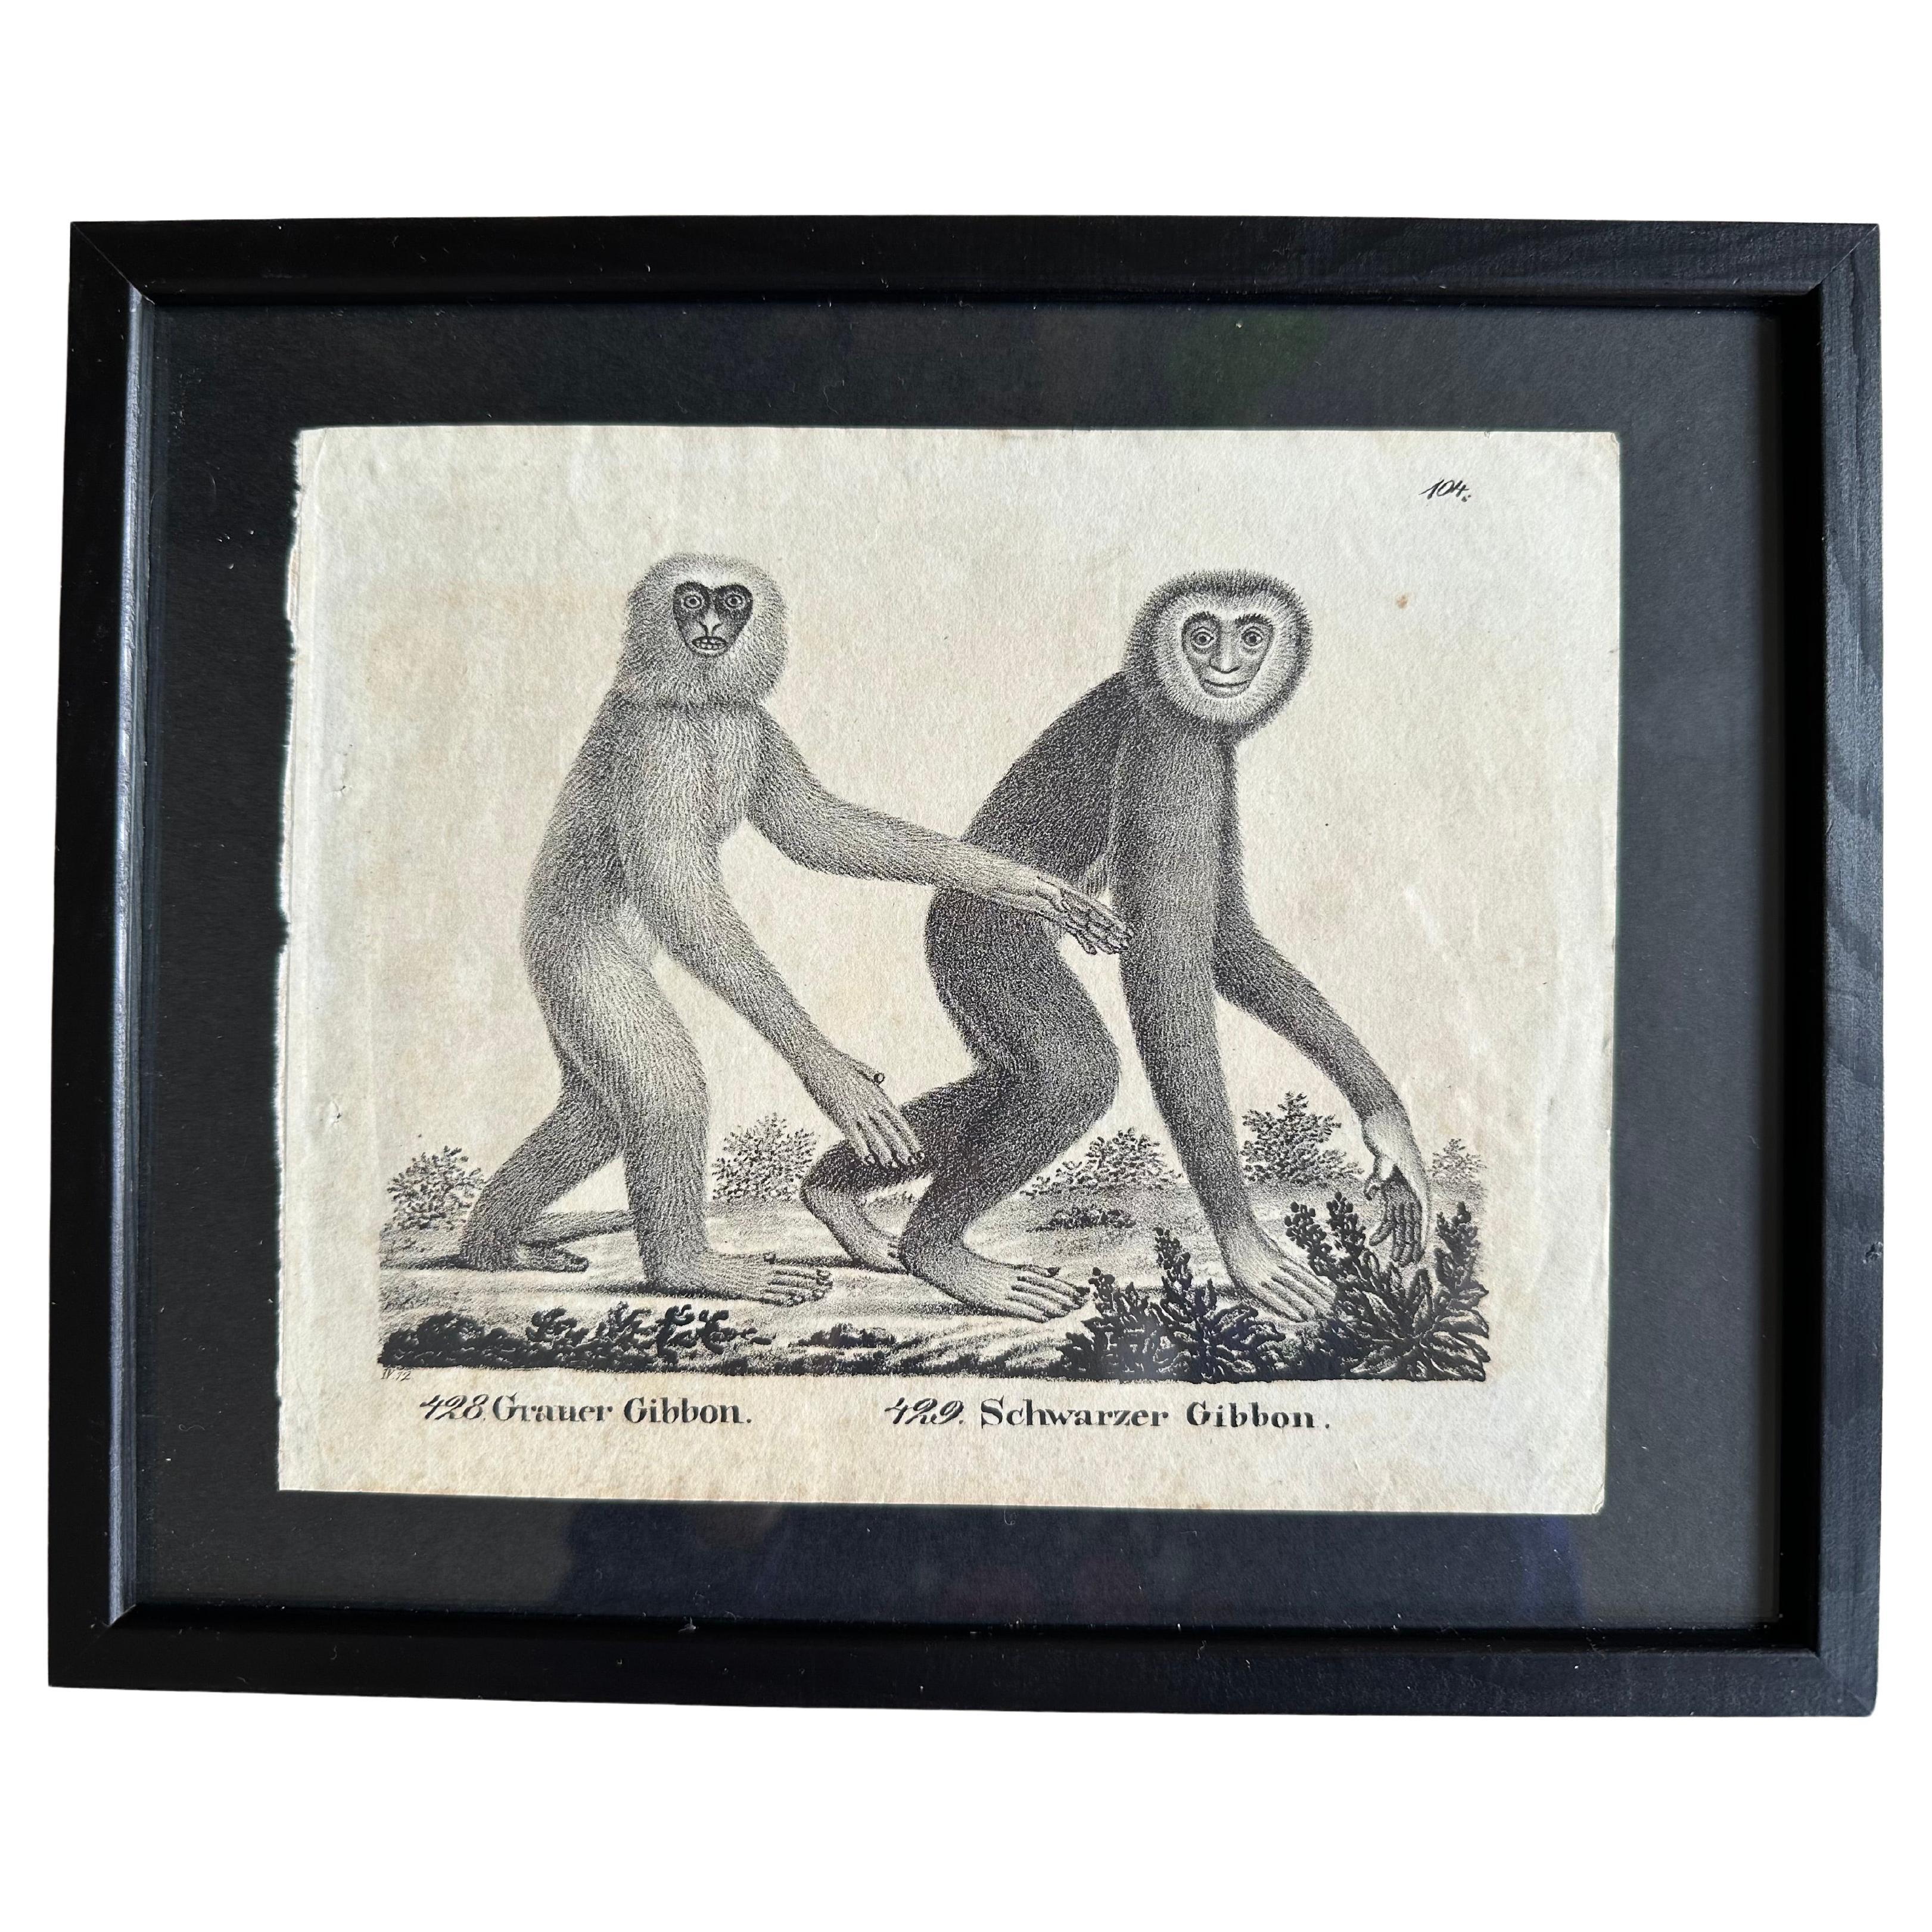 Zoological Original Lithograph Featuring "the Gibbon monkey" from 1831-35 For Sale